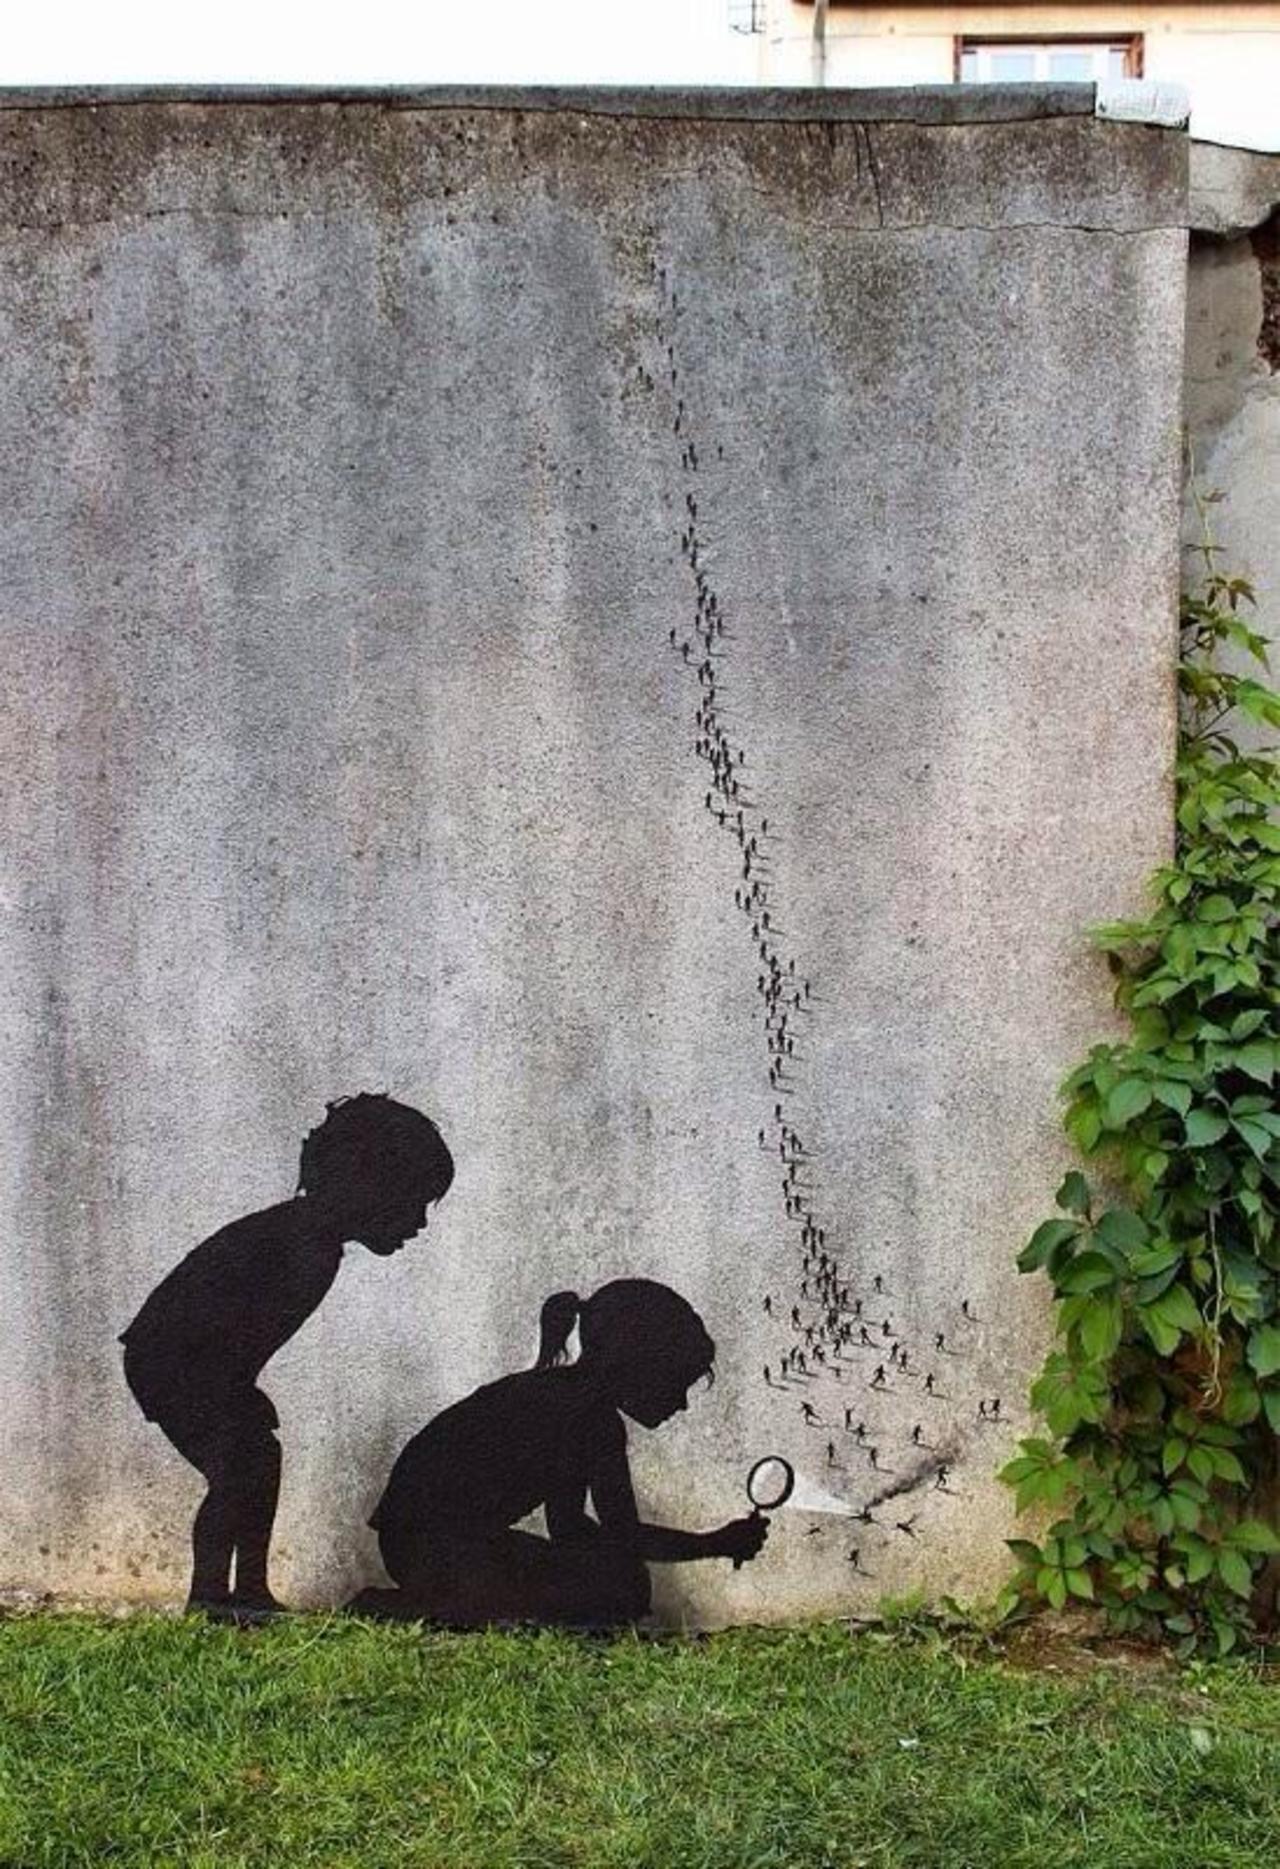 #Paris.

Silhouettes of cruel kids with magnifying glass on 'ant' colony of humans

#art
#graffiti
#streetart 
http://t.co/onY2gJmBhq